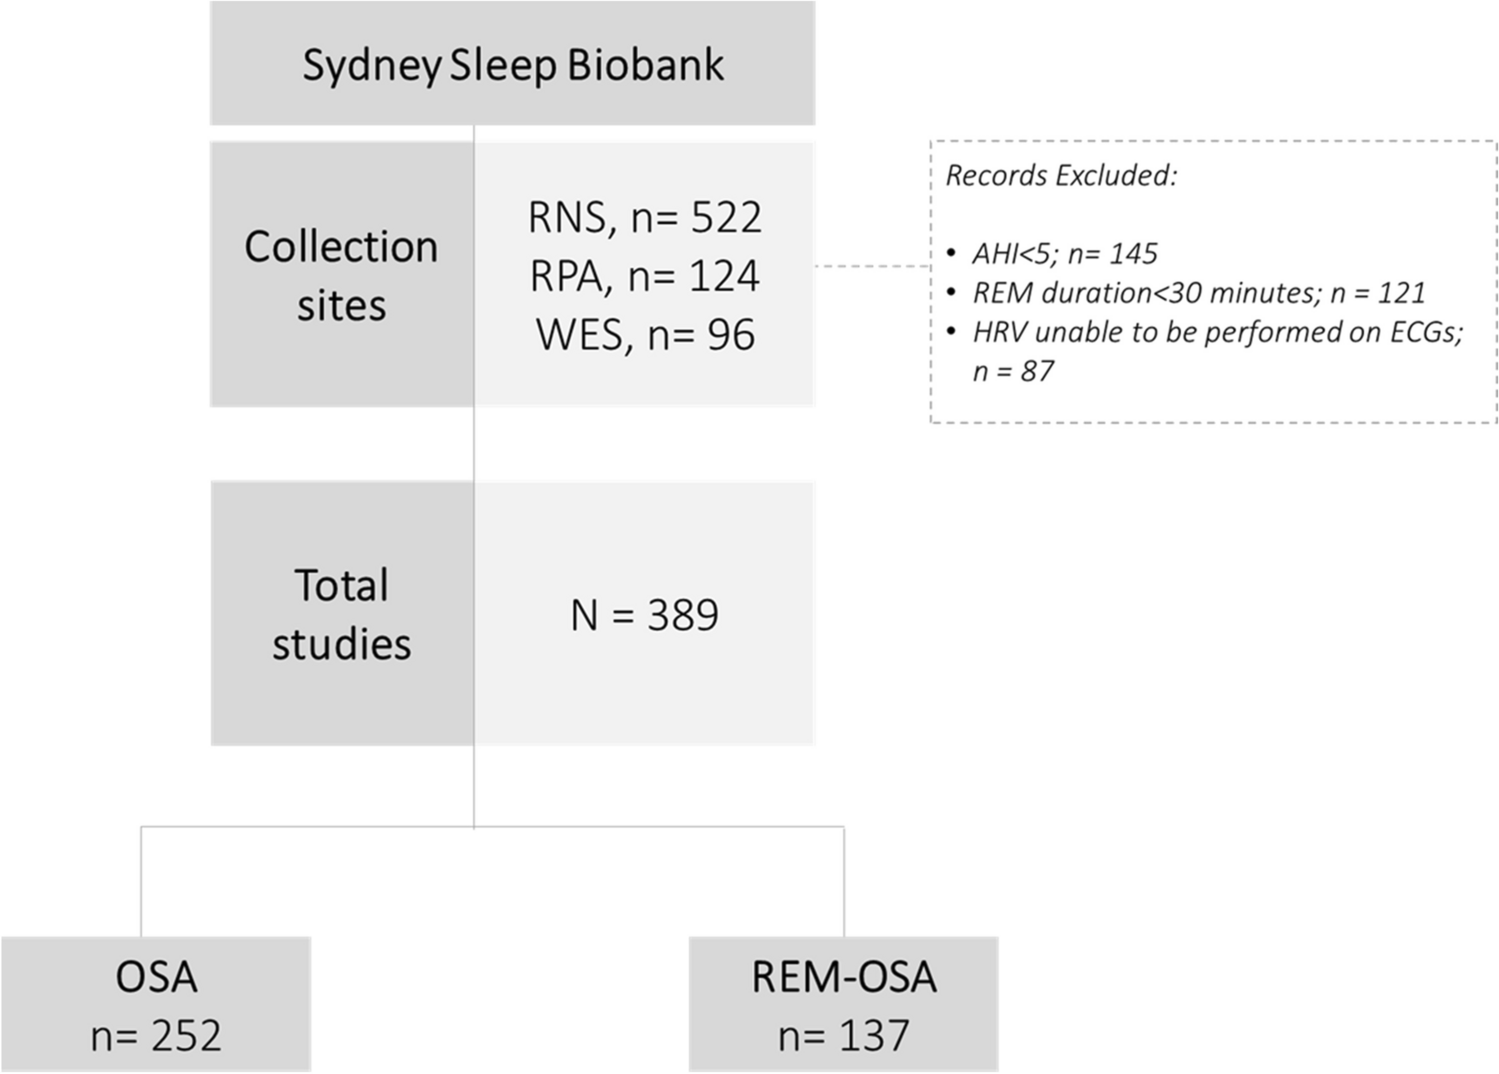 Cardiac autonomic function in REM-related obstructive sleep apnoea: insights from nocturnal heart rate variability profiles